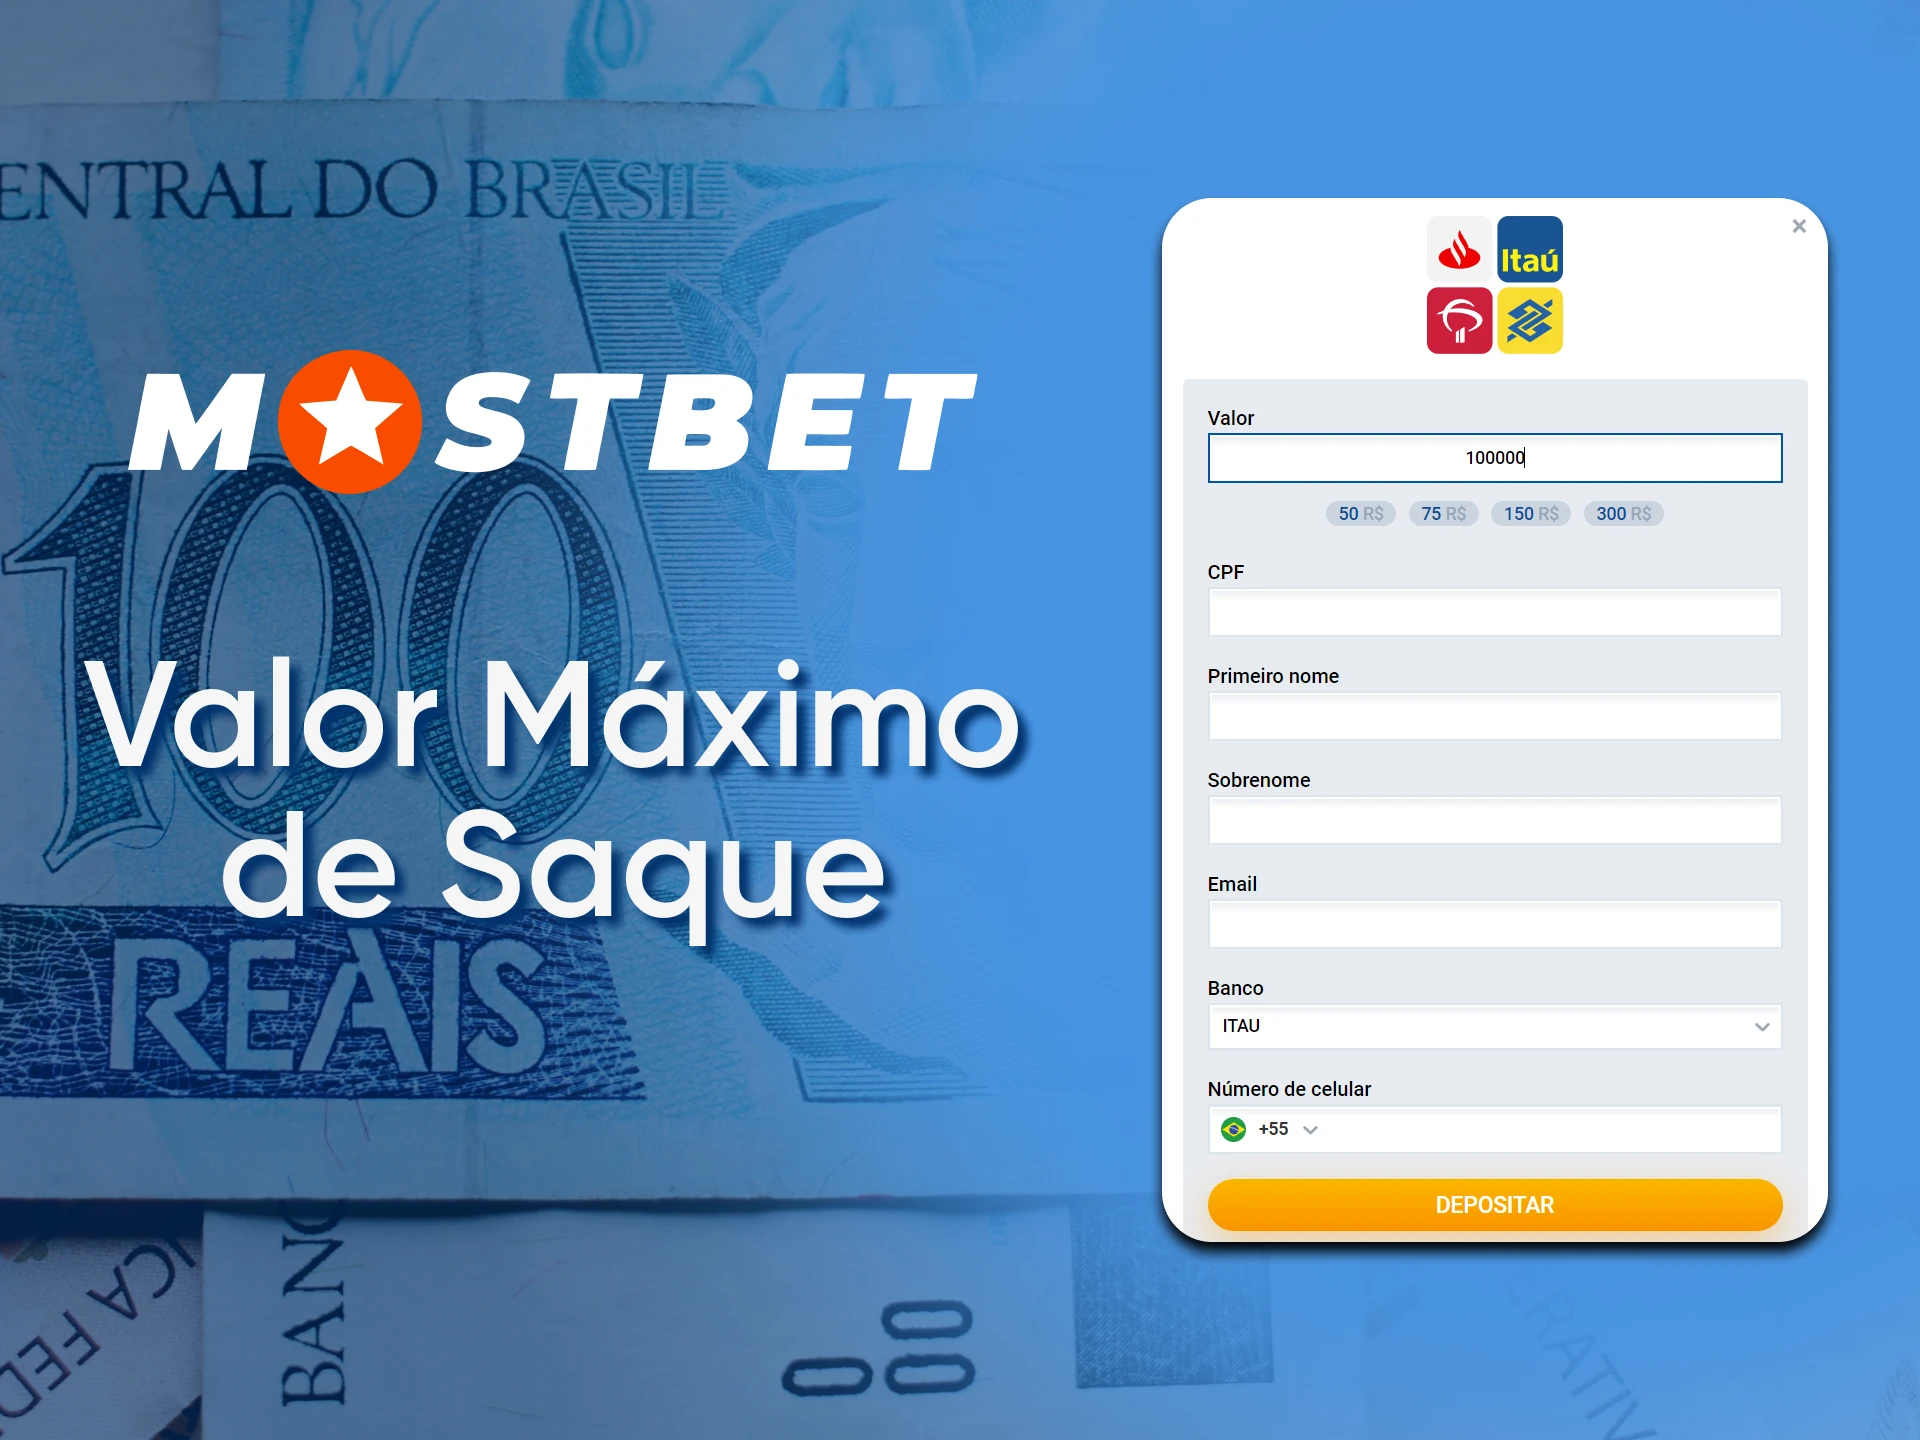 Inquire about Mostbet's maximum withdrawal limit.